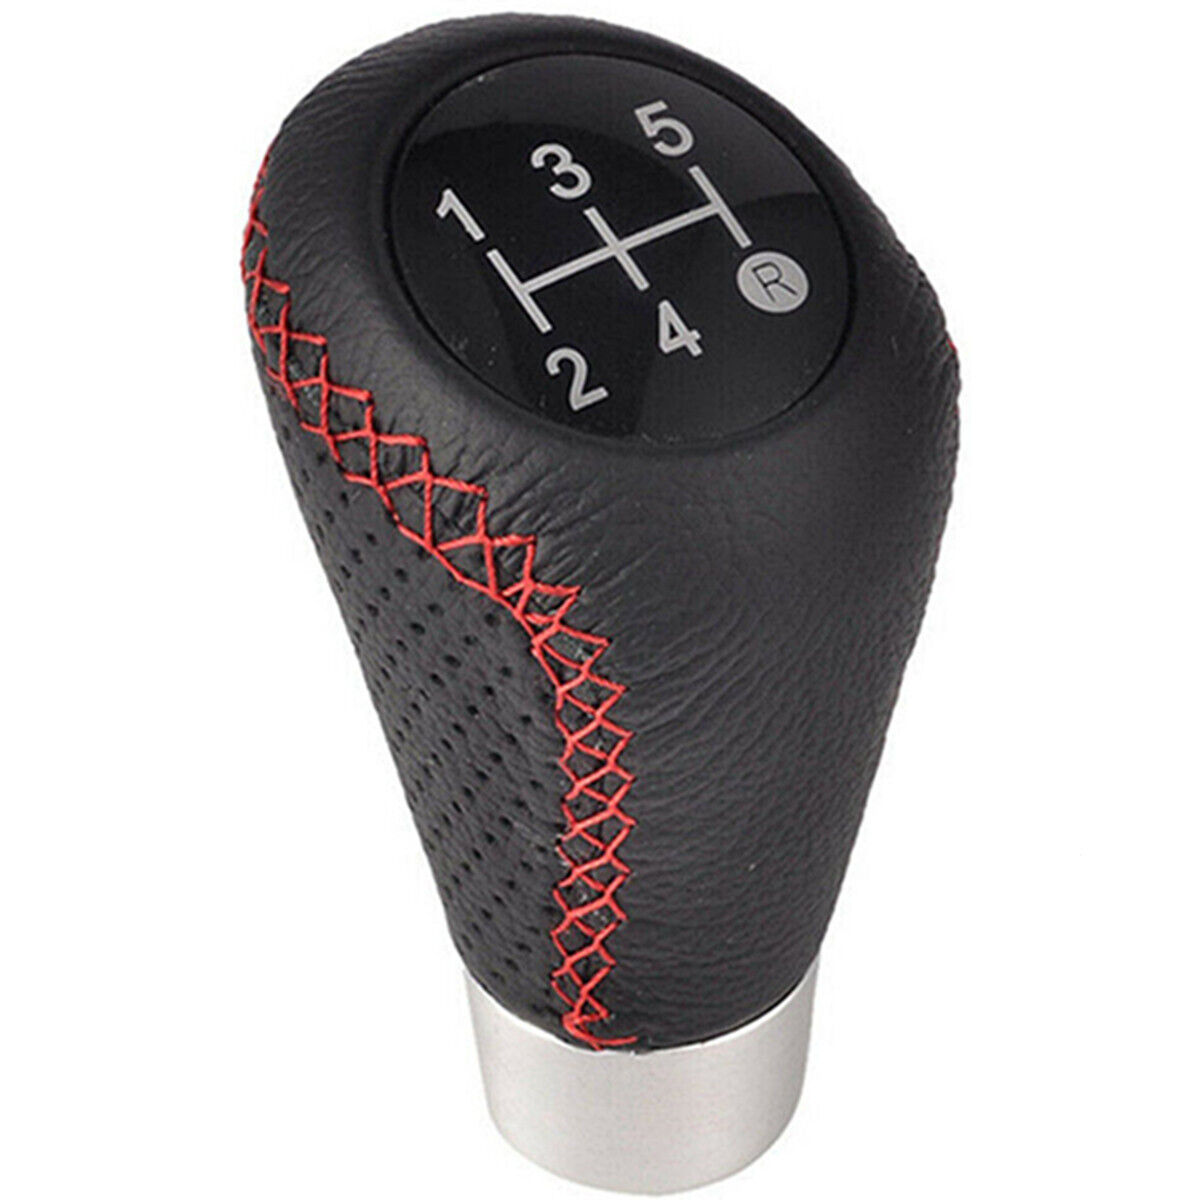 5 Speed Black&Red Line Leather Aluminum Manual Car Gear Shift Knob Shifter Lever